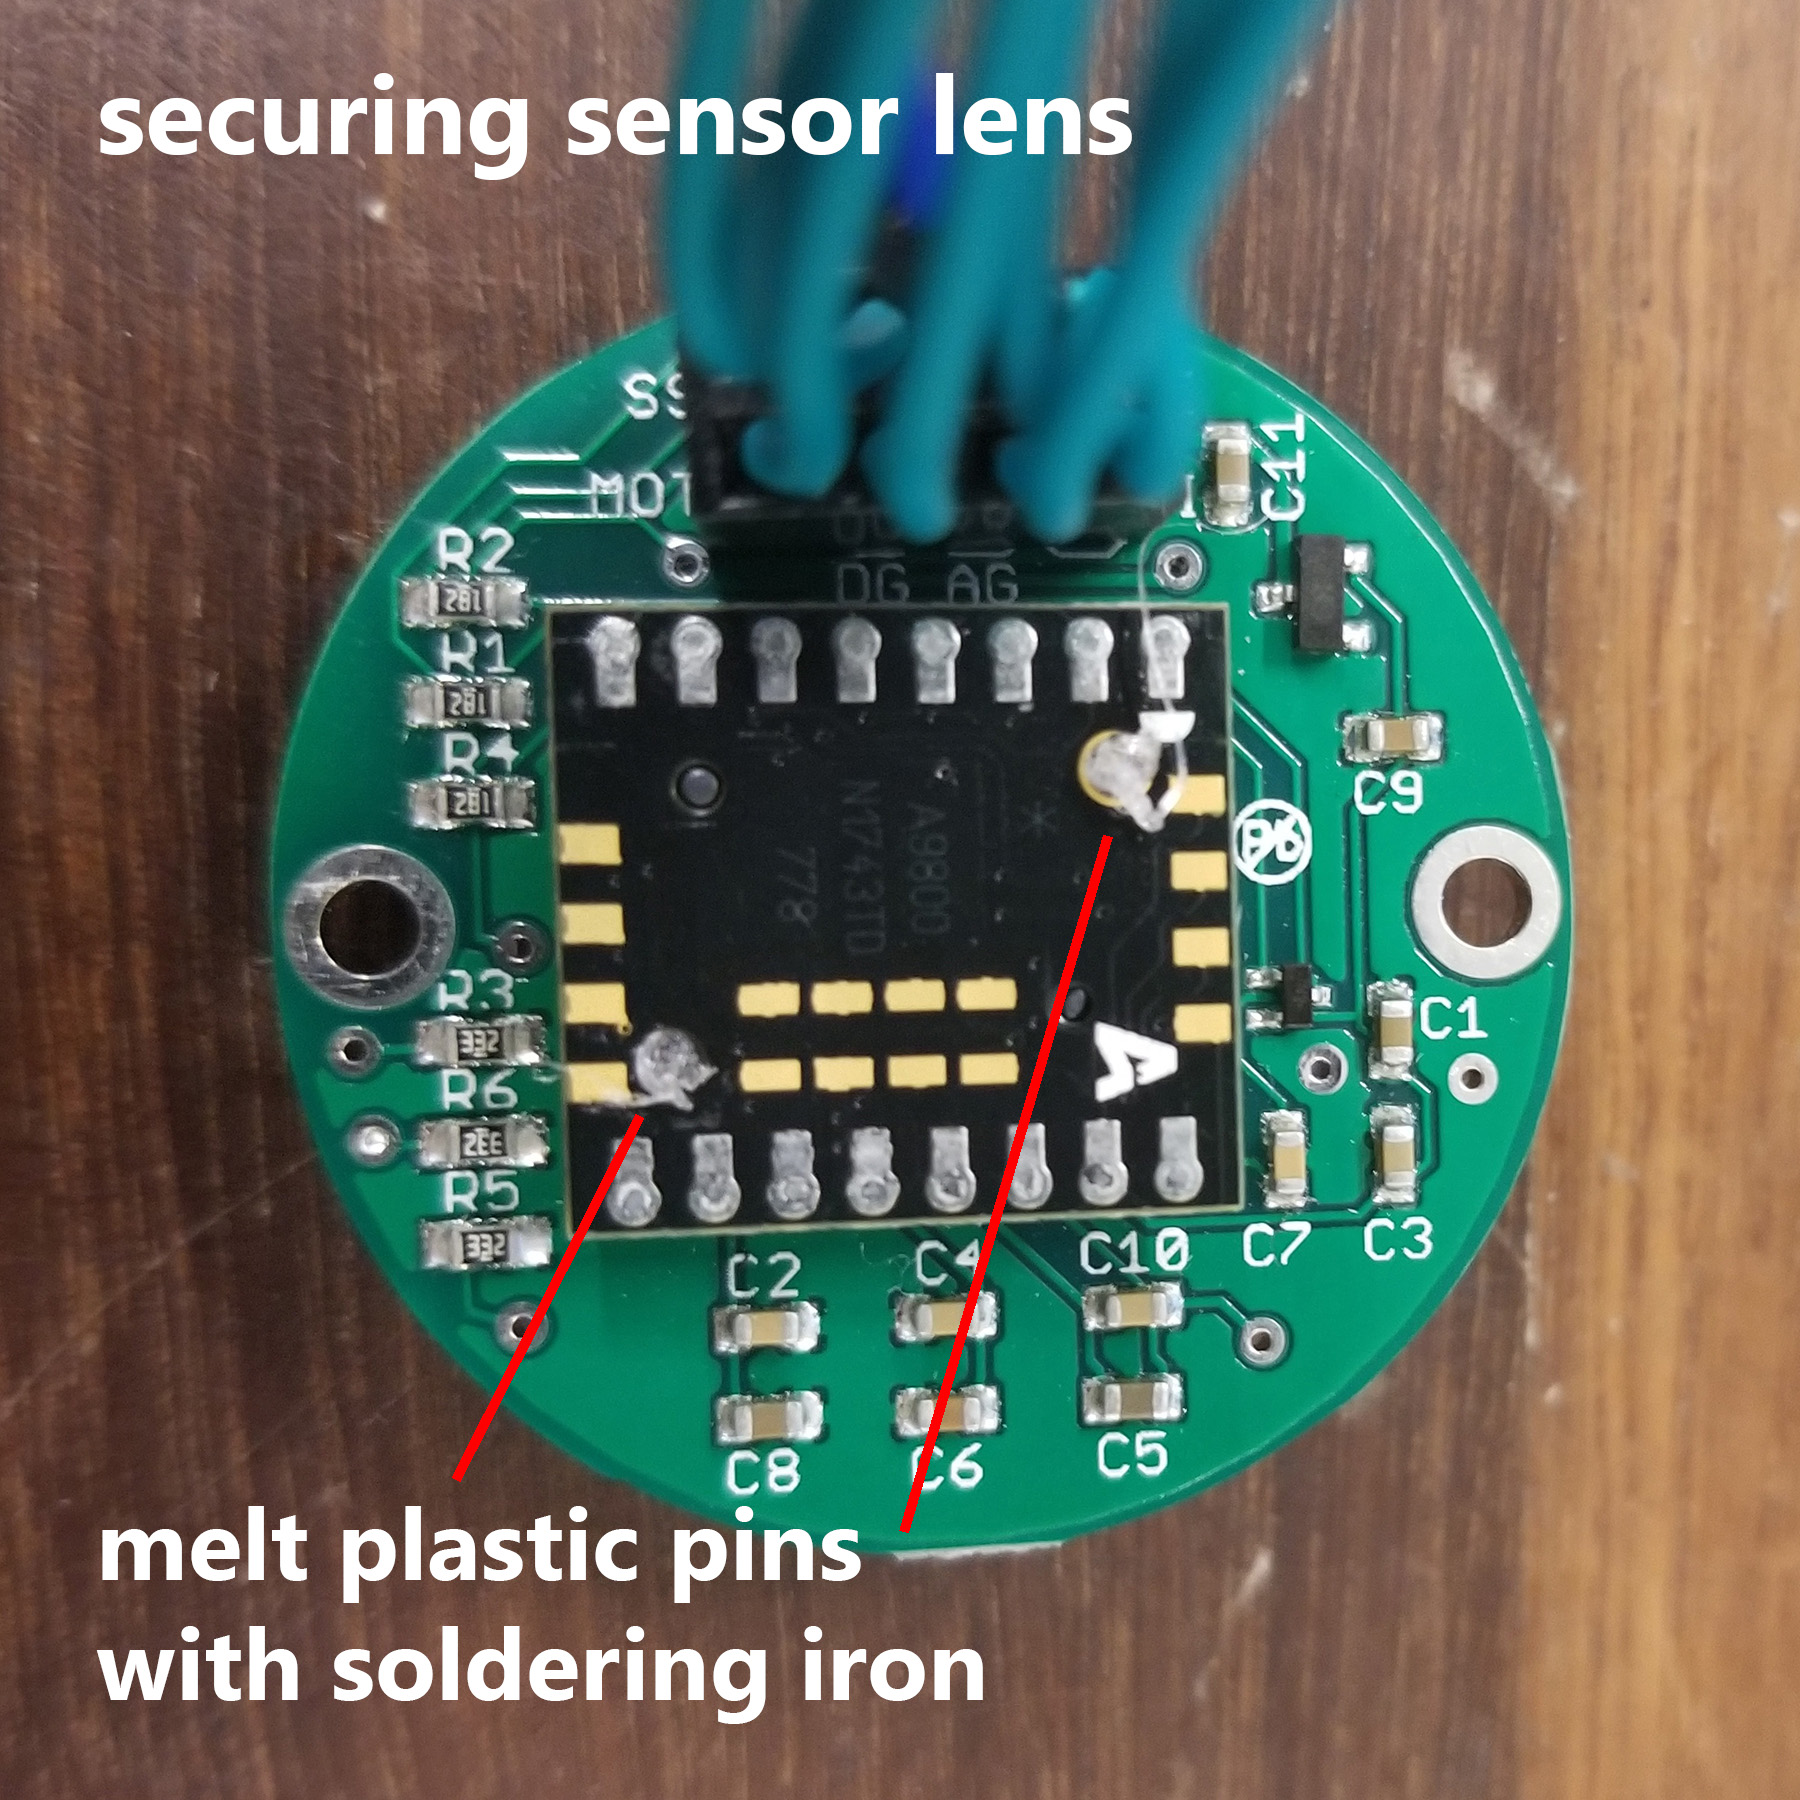 Top of sensor, showing how to secure plastic lens